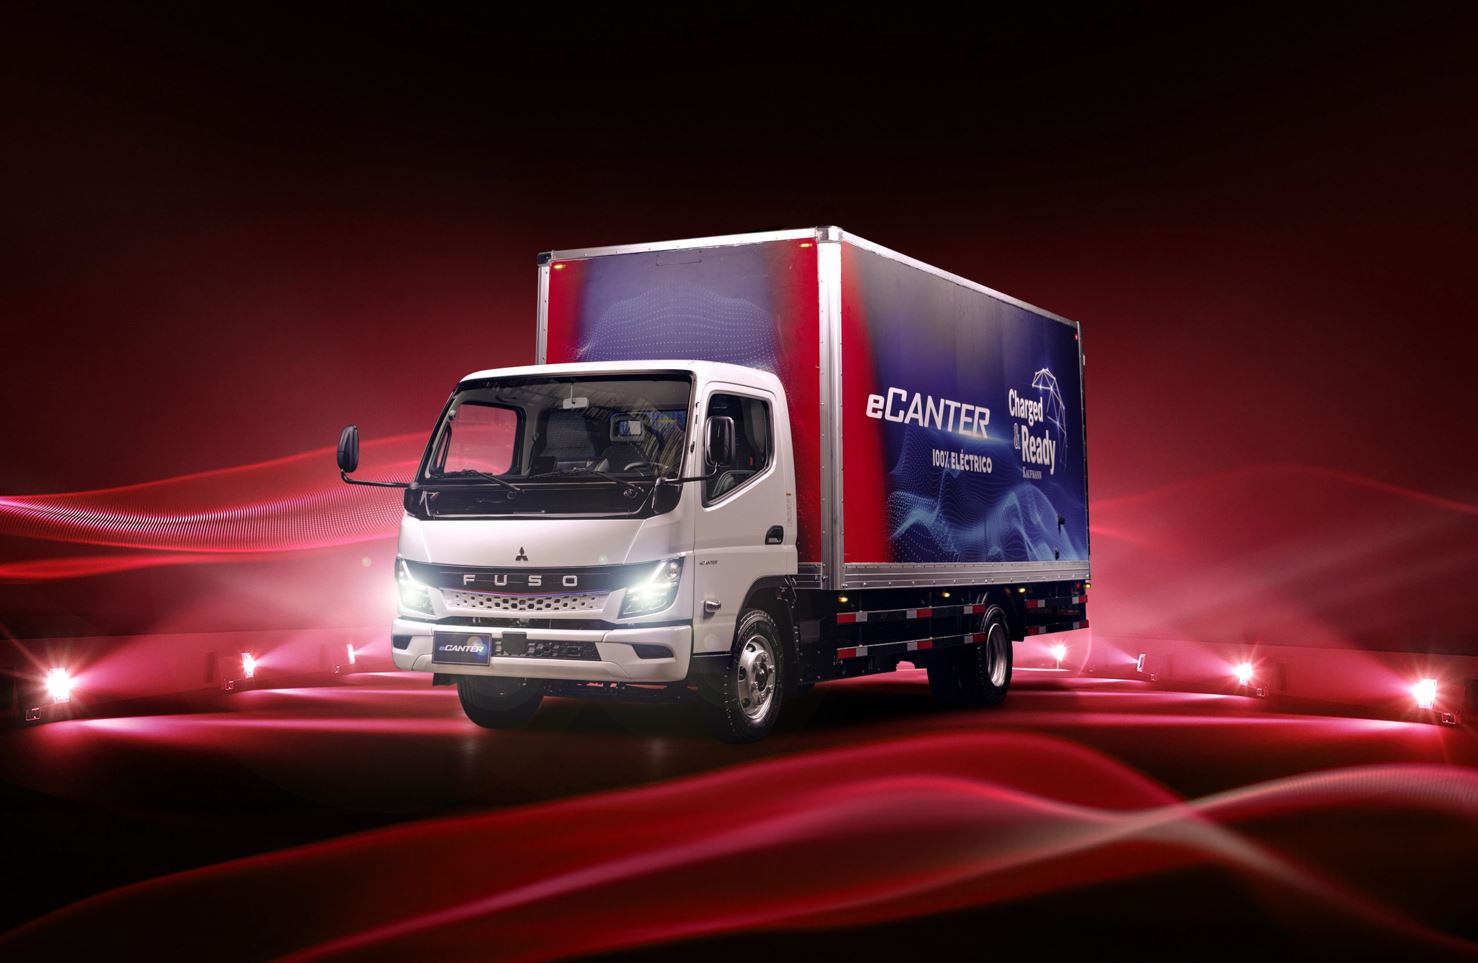 FUSO’s all-electric light duty eCanter truck introduced to Chile, marking the first South American market launch